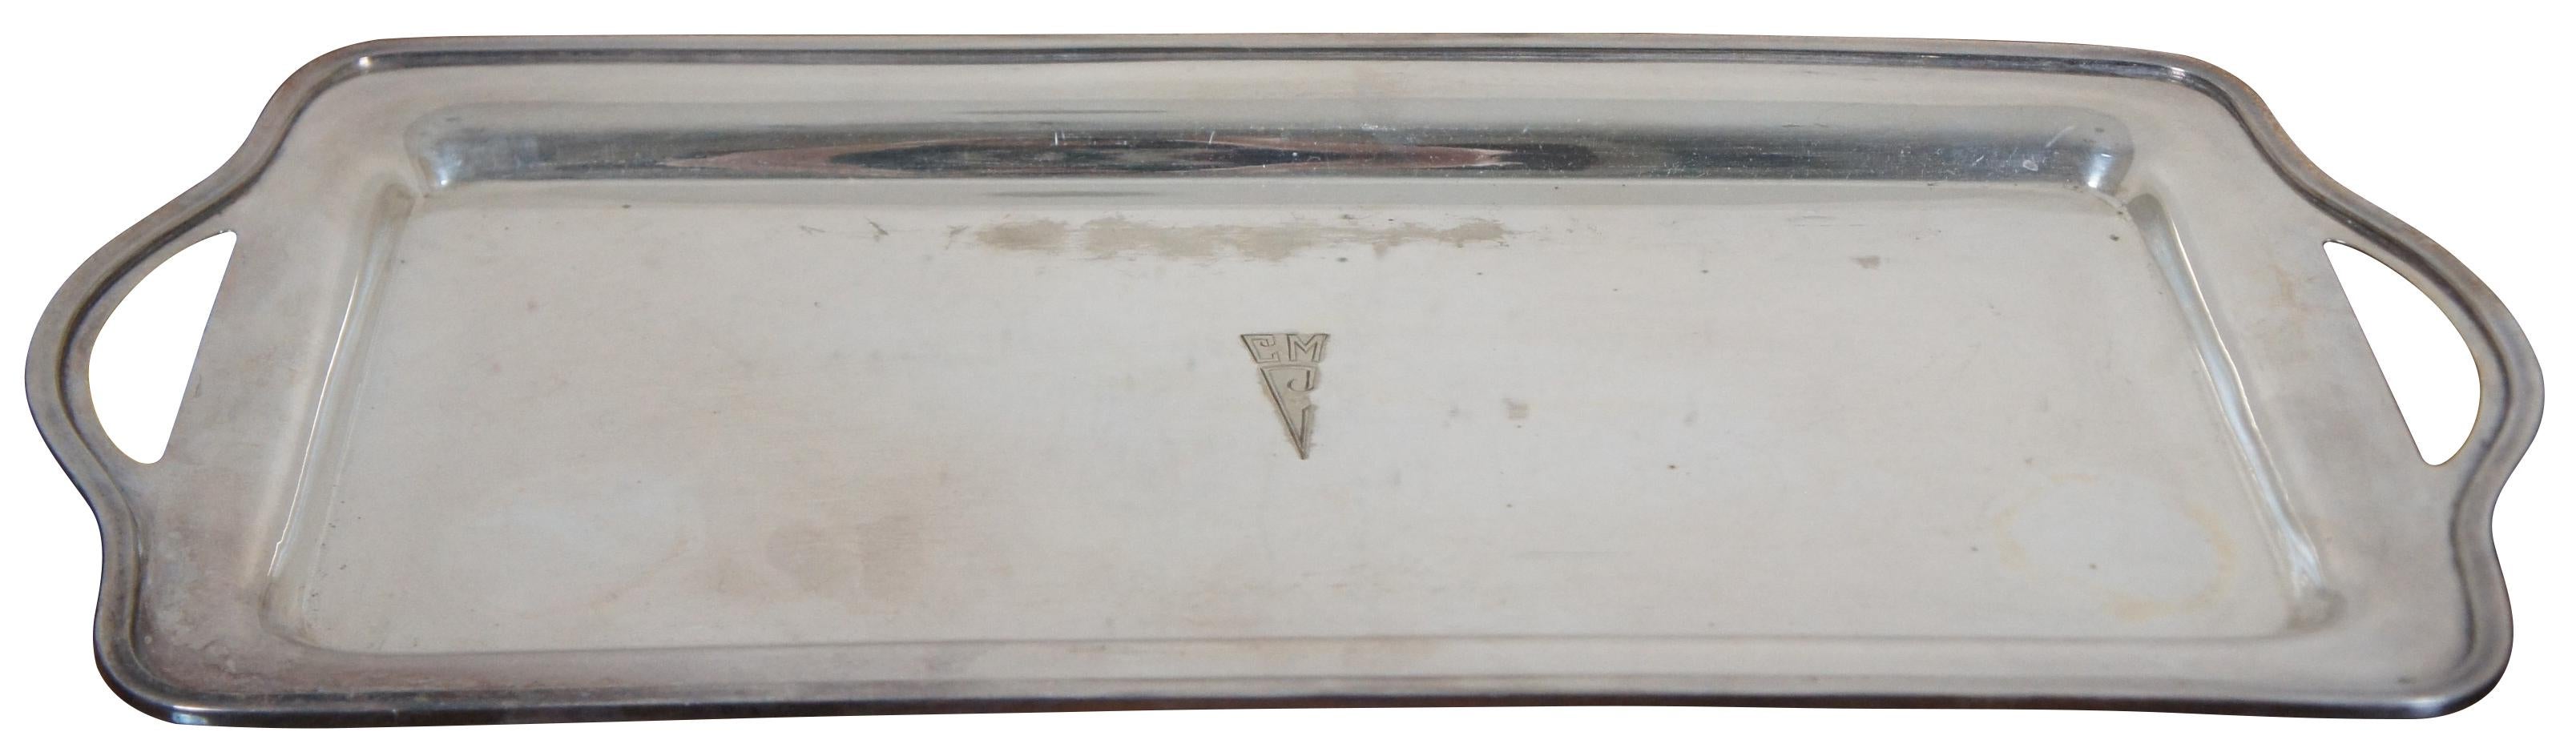 Antique art deco rectangular silver plate serving / calling card tray by the Forbes Silver Company, monogrammed with the initials CMC. “Forbes Silver Co. of Meriden CT - organized in 1894 as a department of Meriden Britannia Co. One of the original